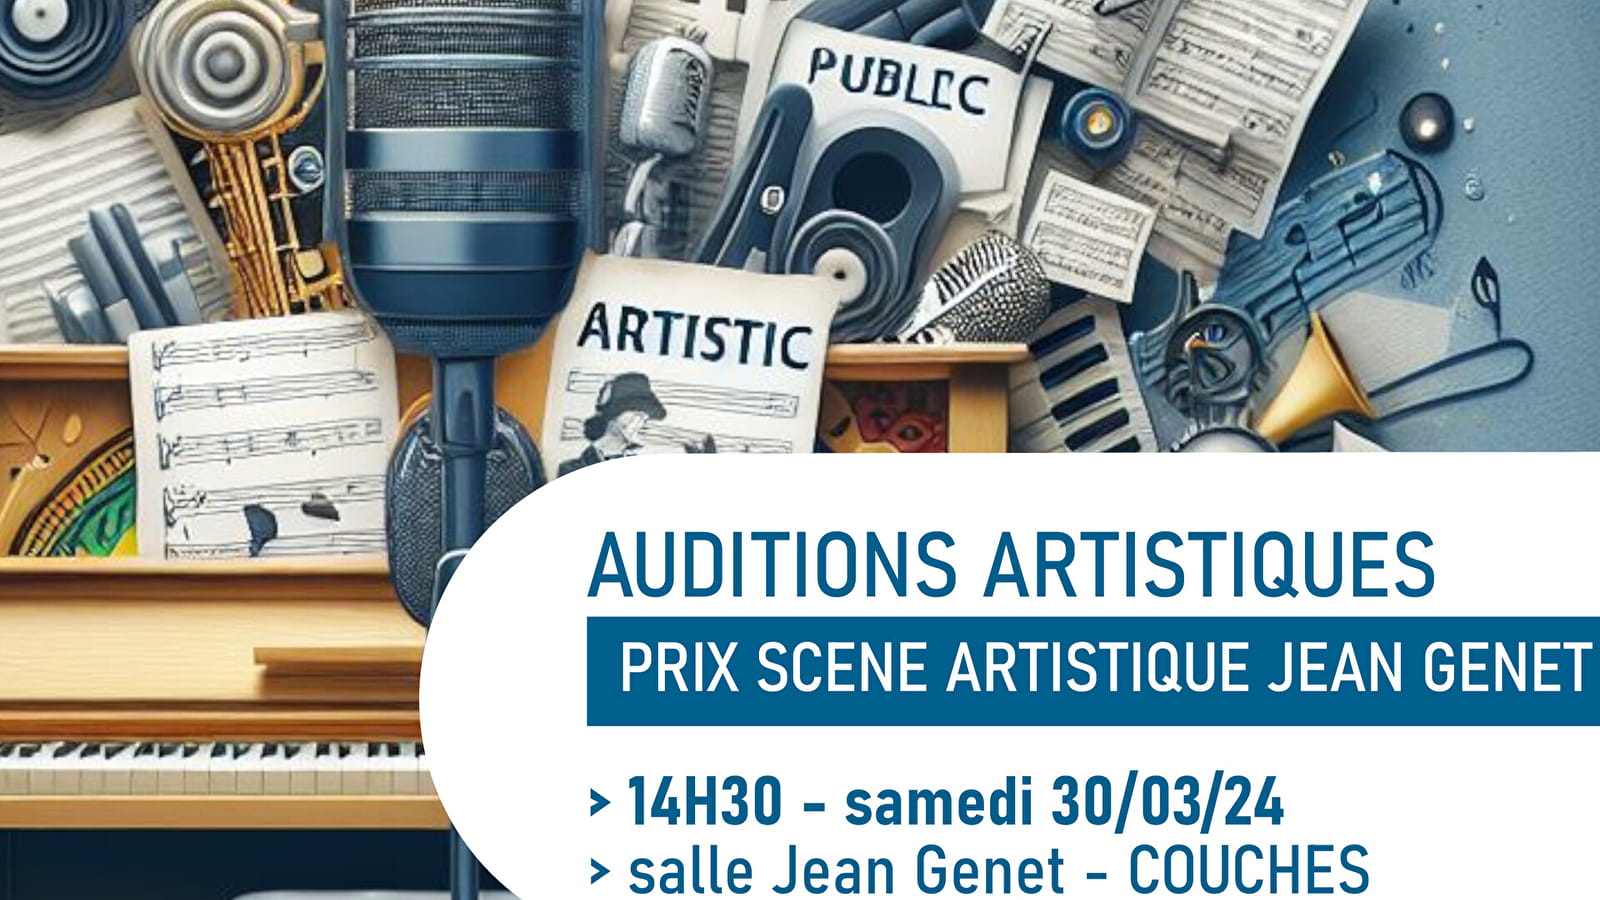 Artistic auditions